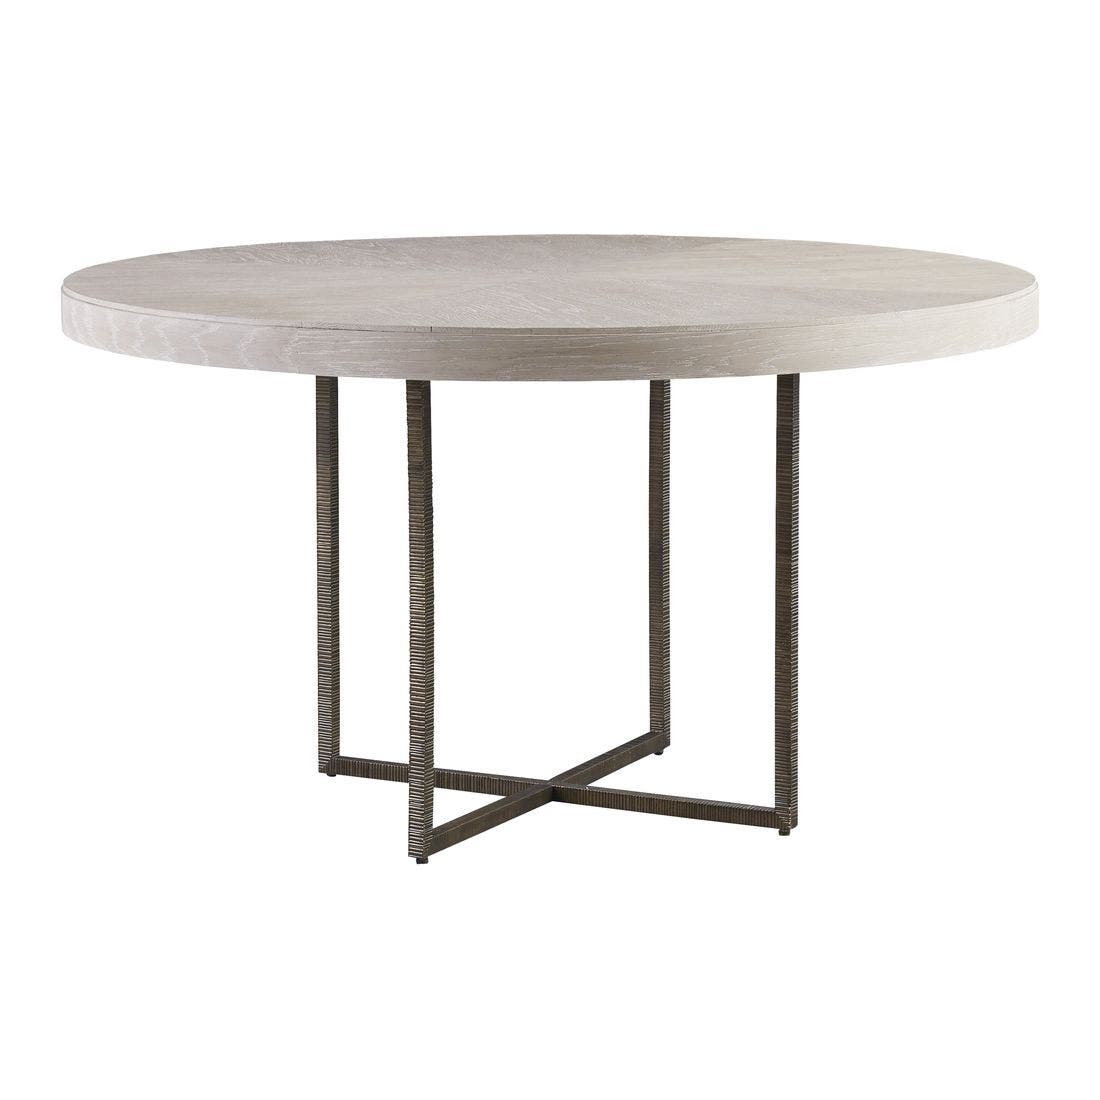 19134681-643757-furniture-dining-room-dining-tables-01